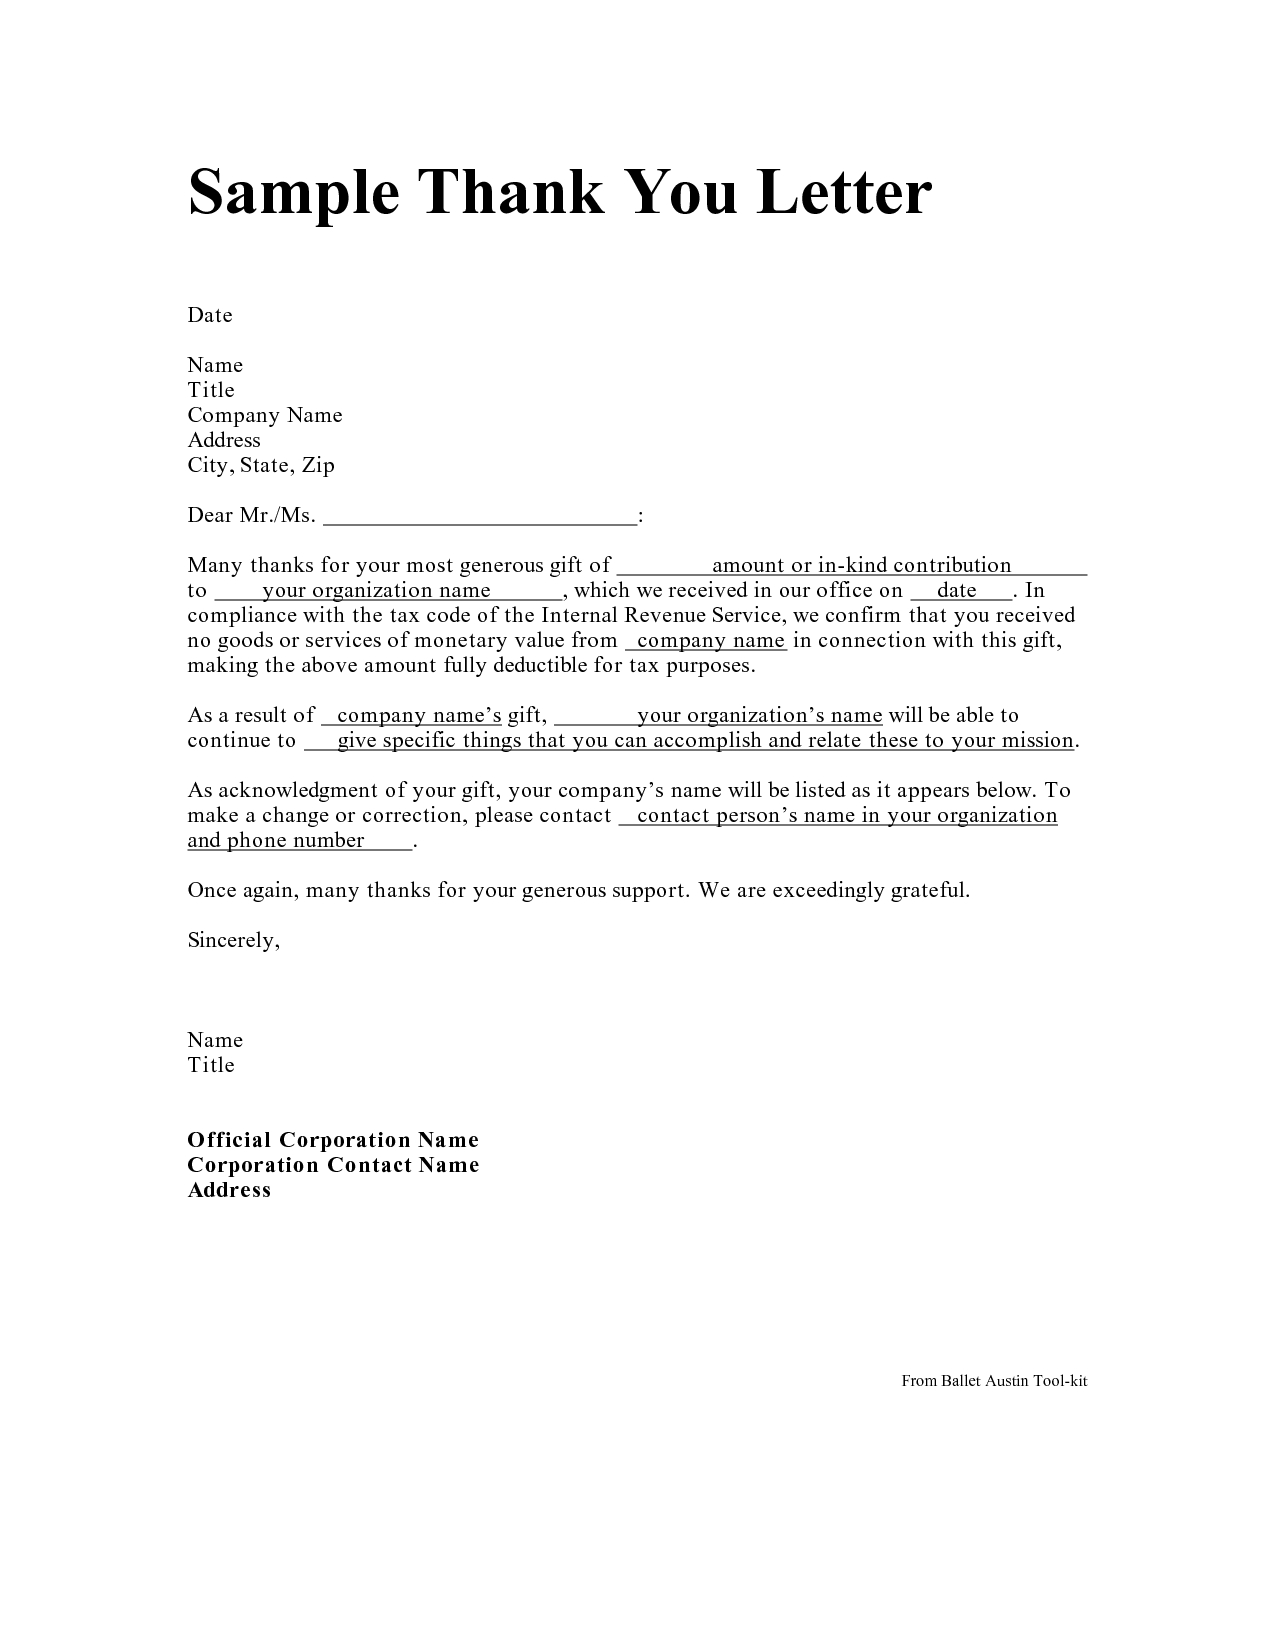 Charity Letter Template asking for Donations - Personal Thank You Letter Personal Thank You Letter Samples